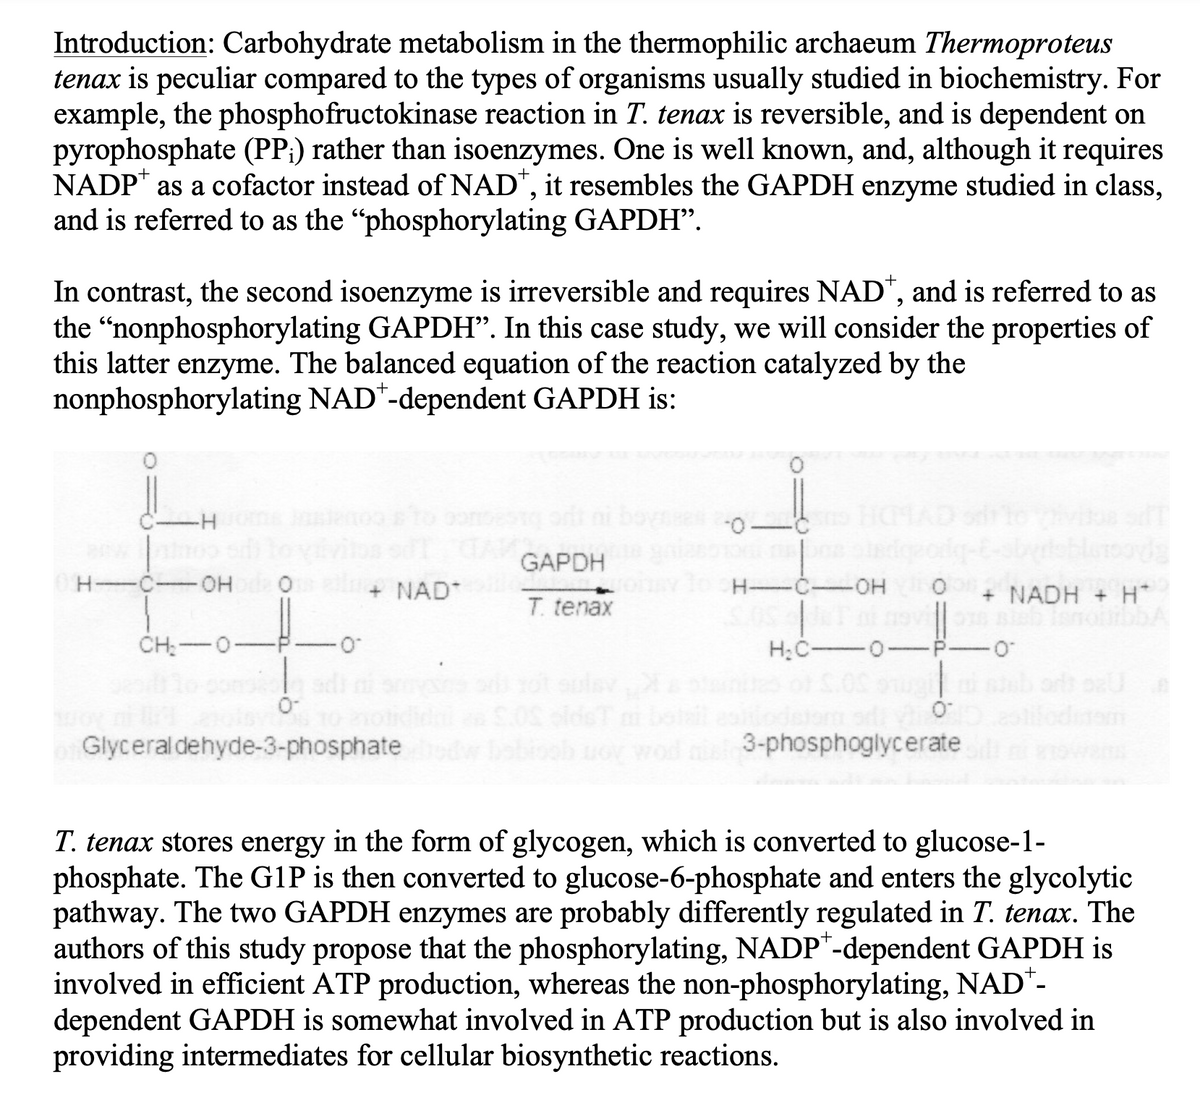 Introduction: Carbohydrate metabolism in the thermophilic archaeum Thermoproteus
tenax is peculiar compared to the types of organisms usually studied in biochemistry. For
example, the phosphofructokinase reaction in T. tenax is reversible, and is dependent on
pyrophosphate (PP;) rather than isoenzymes. One is well known, and, although it requires
NADP as a cofactor instead of NAD*, it resembles the GAPDH enzyme studied in class,
and is referred to as the "phosphorylating GAPDH”.
In contrast, the second isoenzyme is irreversible and requires NAD*, and is referred to as
the "nonphosphorylating GAPDH". In this case study, we will consider the properties of
this latter enzyme. The balanced equation of the reaction catalyzed by the
nonphosphorylating NAD*-dependent GAPDH is:
H
-H
-C-OHDO al
CHO
NAD*
of Glyceraldehyde-3-phosphate bedw
GAPDH
T. tenax
-0-6
H-C-OH
H₂C-0-
3-phosphoglycerate
+ NADH + H*
-0
T. tenax stores energy in the form of glycogen, which is converted to glucose-1-
phosphate. The G1P is then converted to glucose-6-phosphate and enters the glycolytic
pathway. The two GAPDH enzymes are probably differently regulated in T. tenax. The
authors of this study propose that the phosphorylating, NADP-dependent GAPDH is
involved in efficient ATP production, whereas the non-phosphorylating, NAD*-
dependent GAPDH is somewhat involved in ATP production but is also involved in
providing intermediates for cellular biosynthetic reactions.